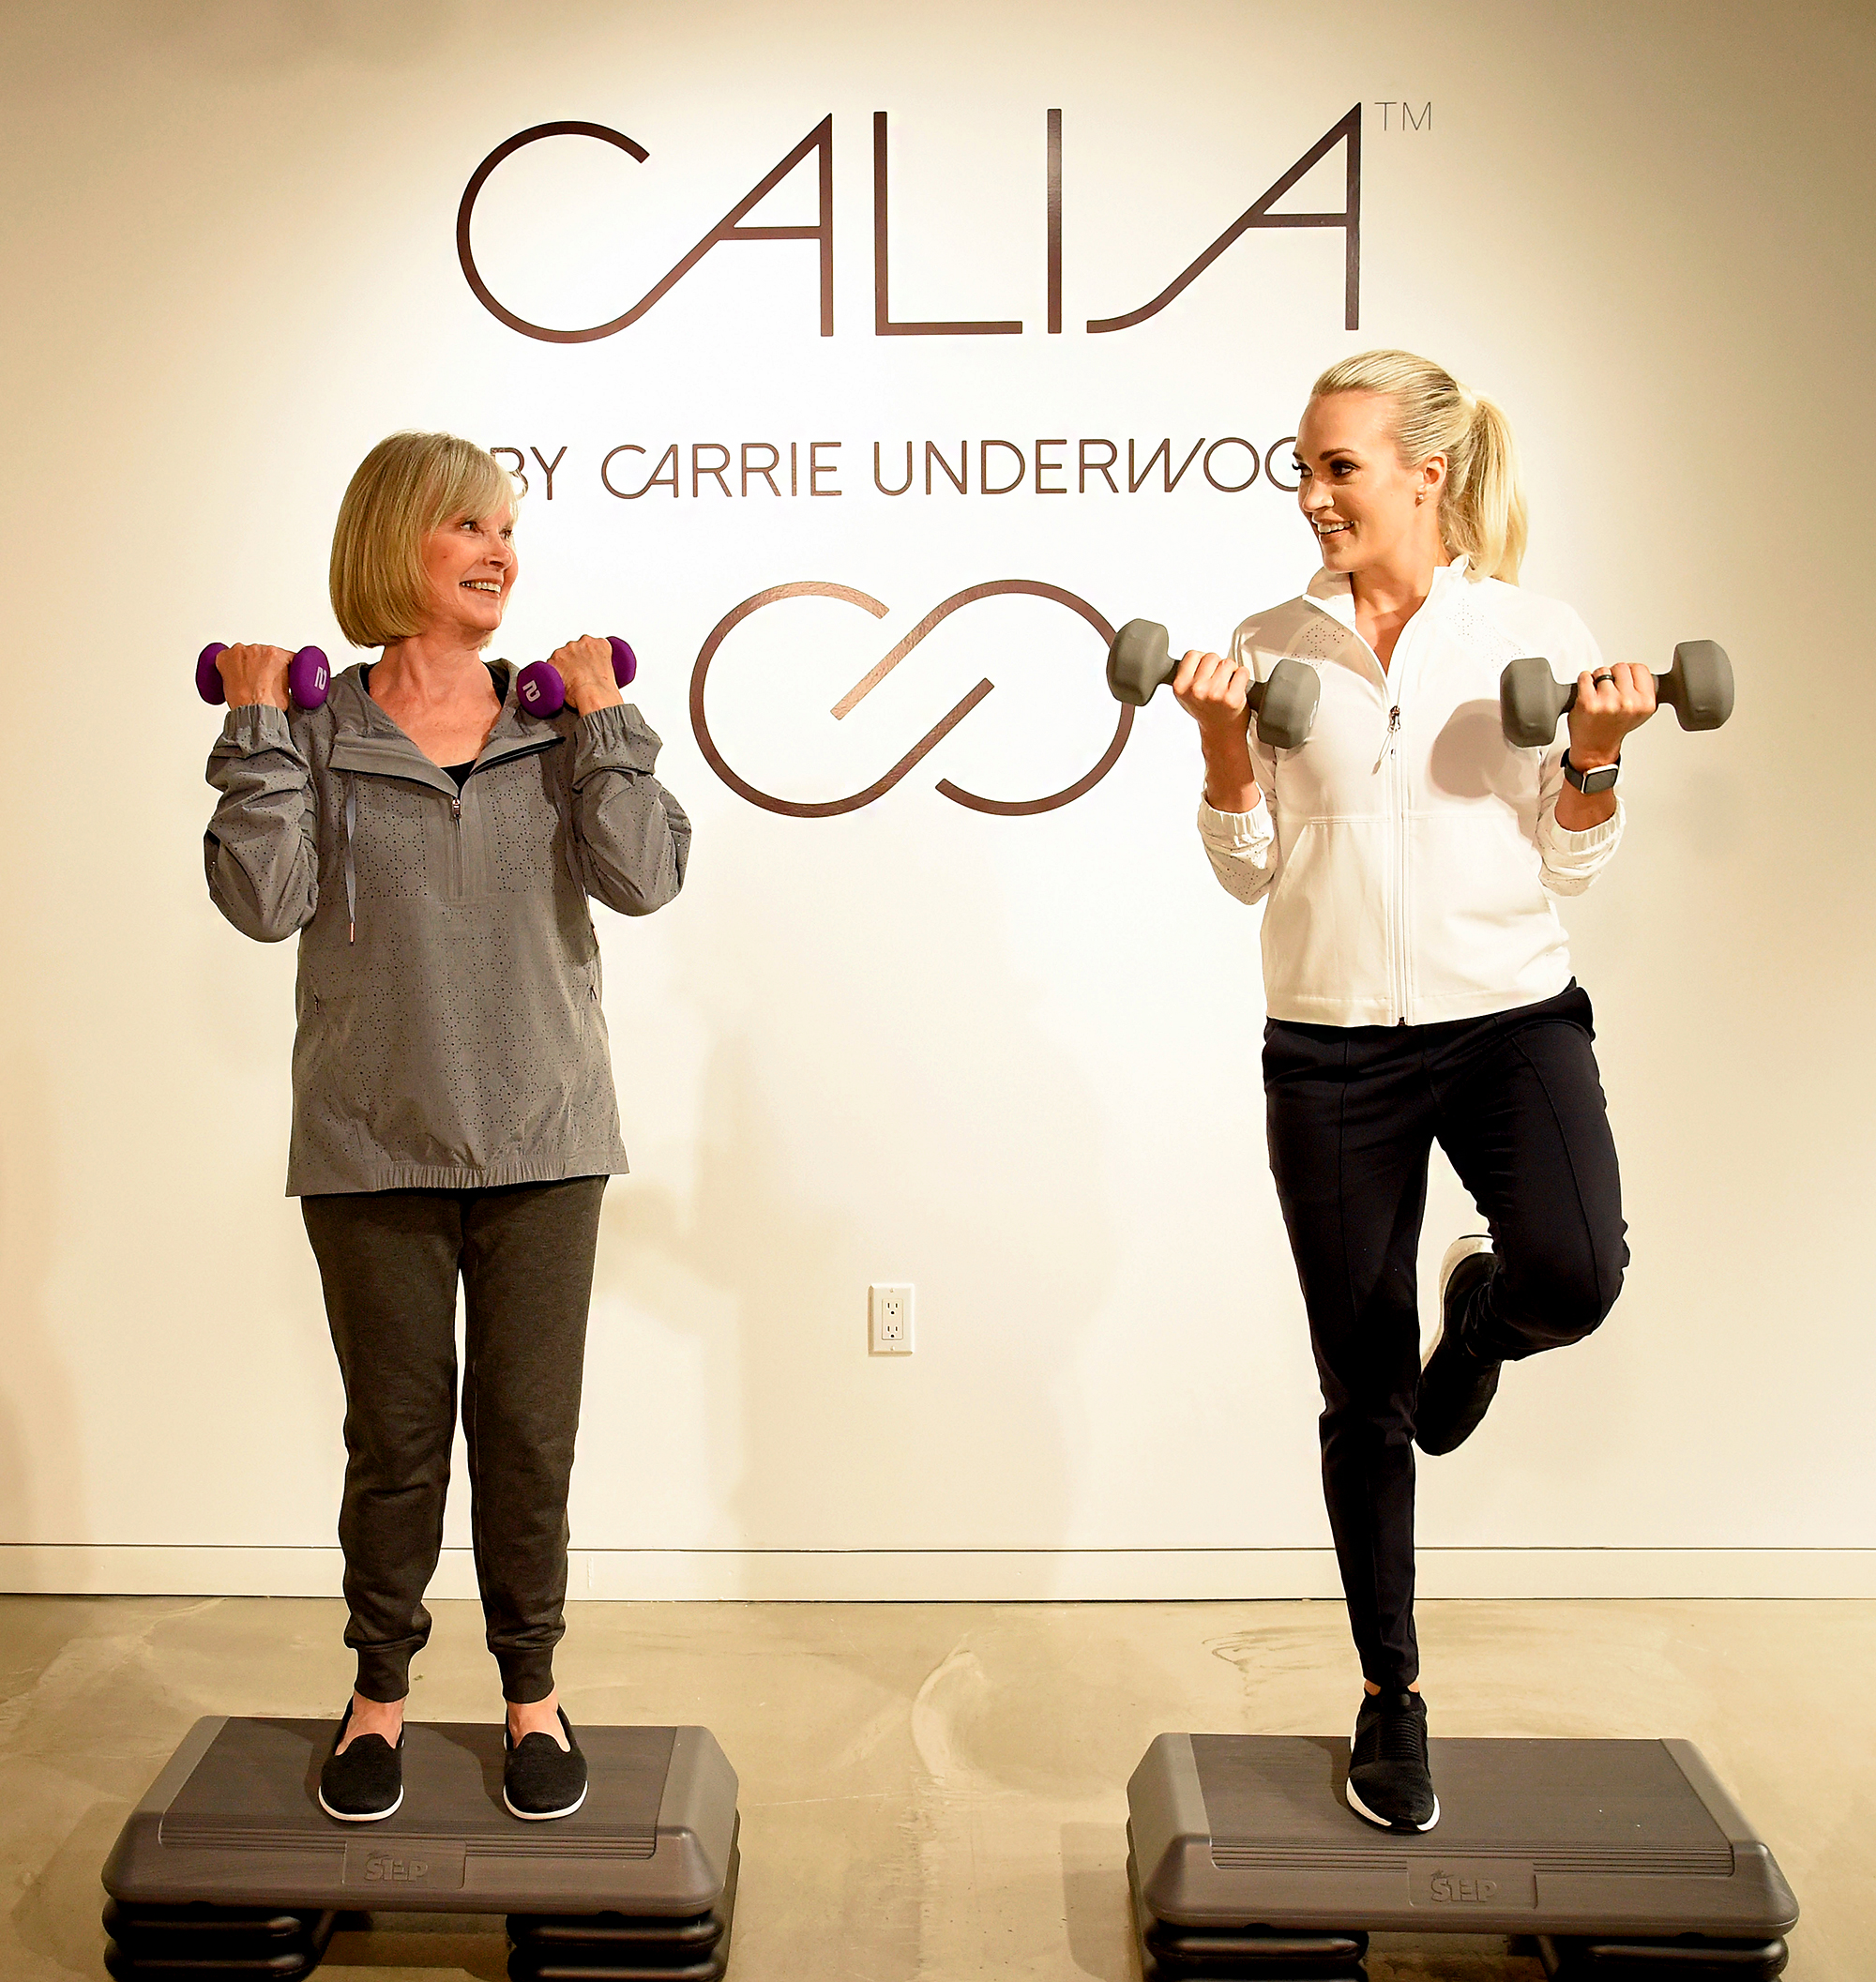 I Got to Workout With Carrie Underwood! - Thriving With Caroline